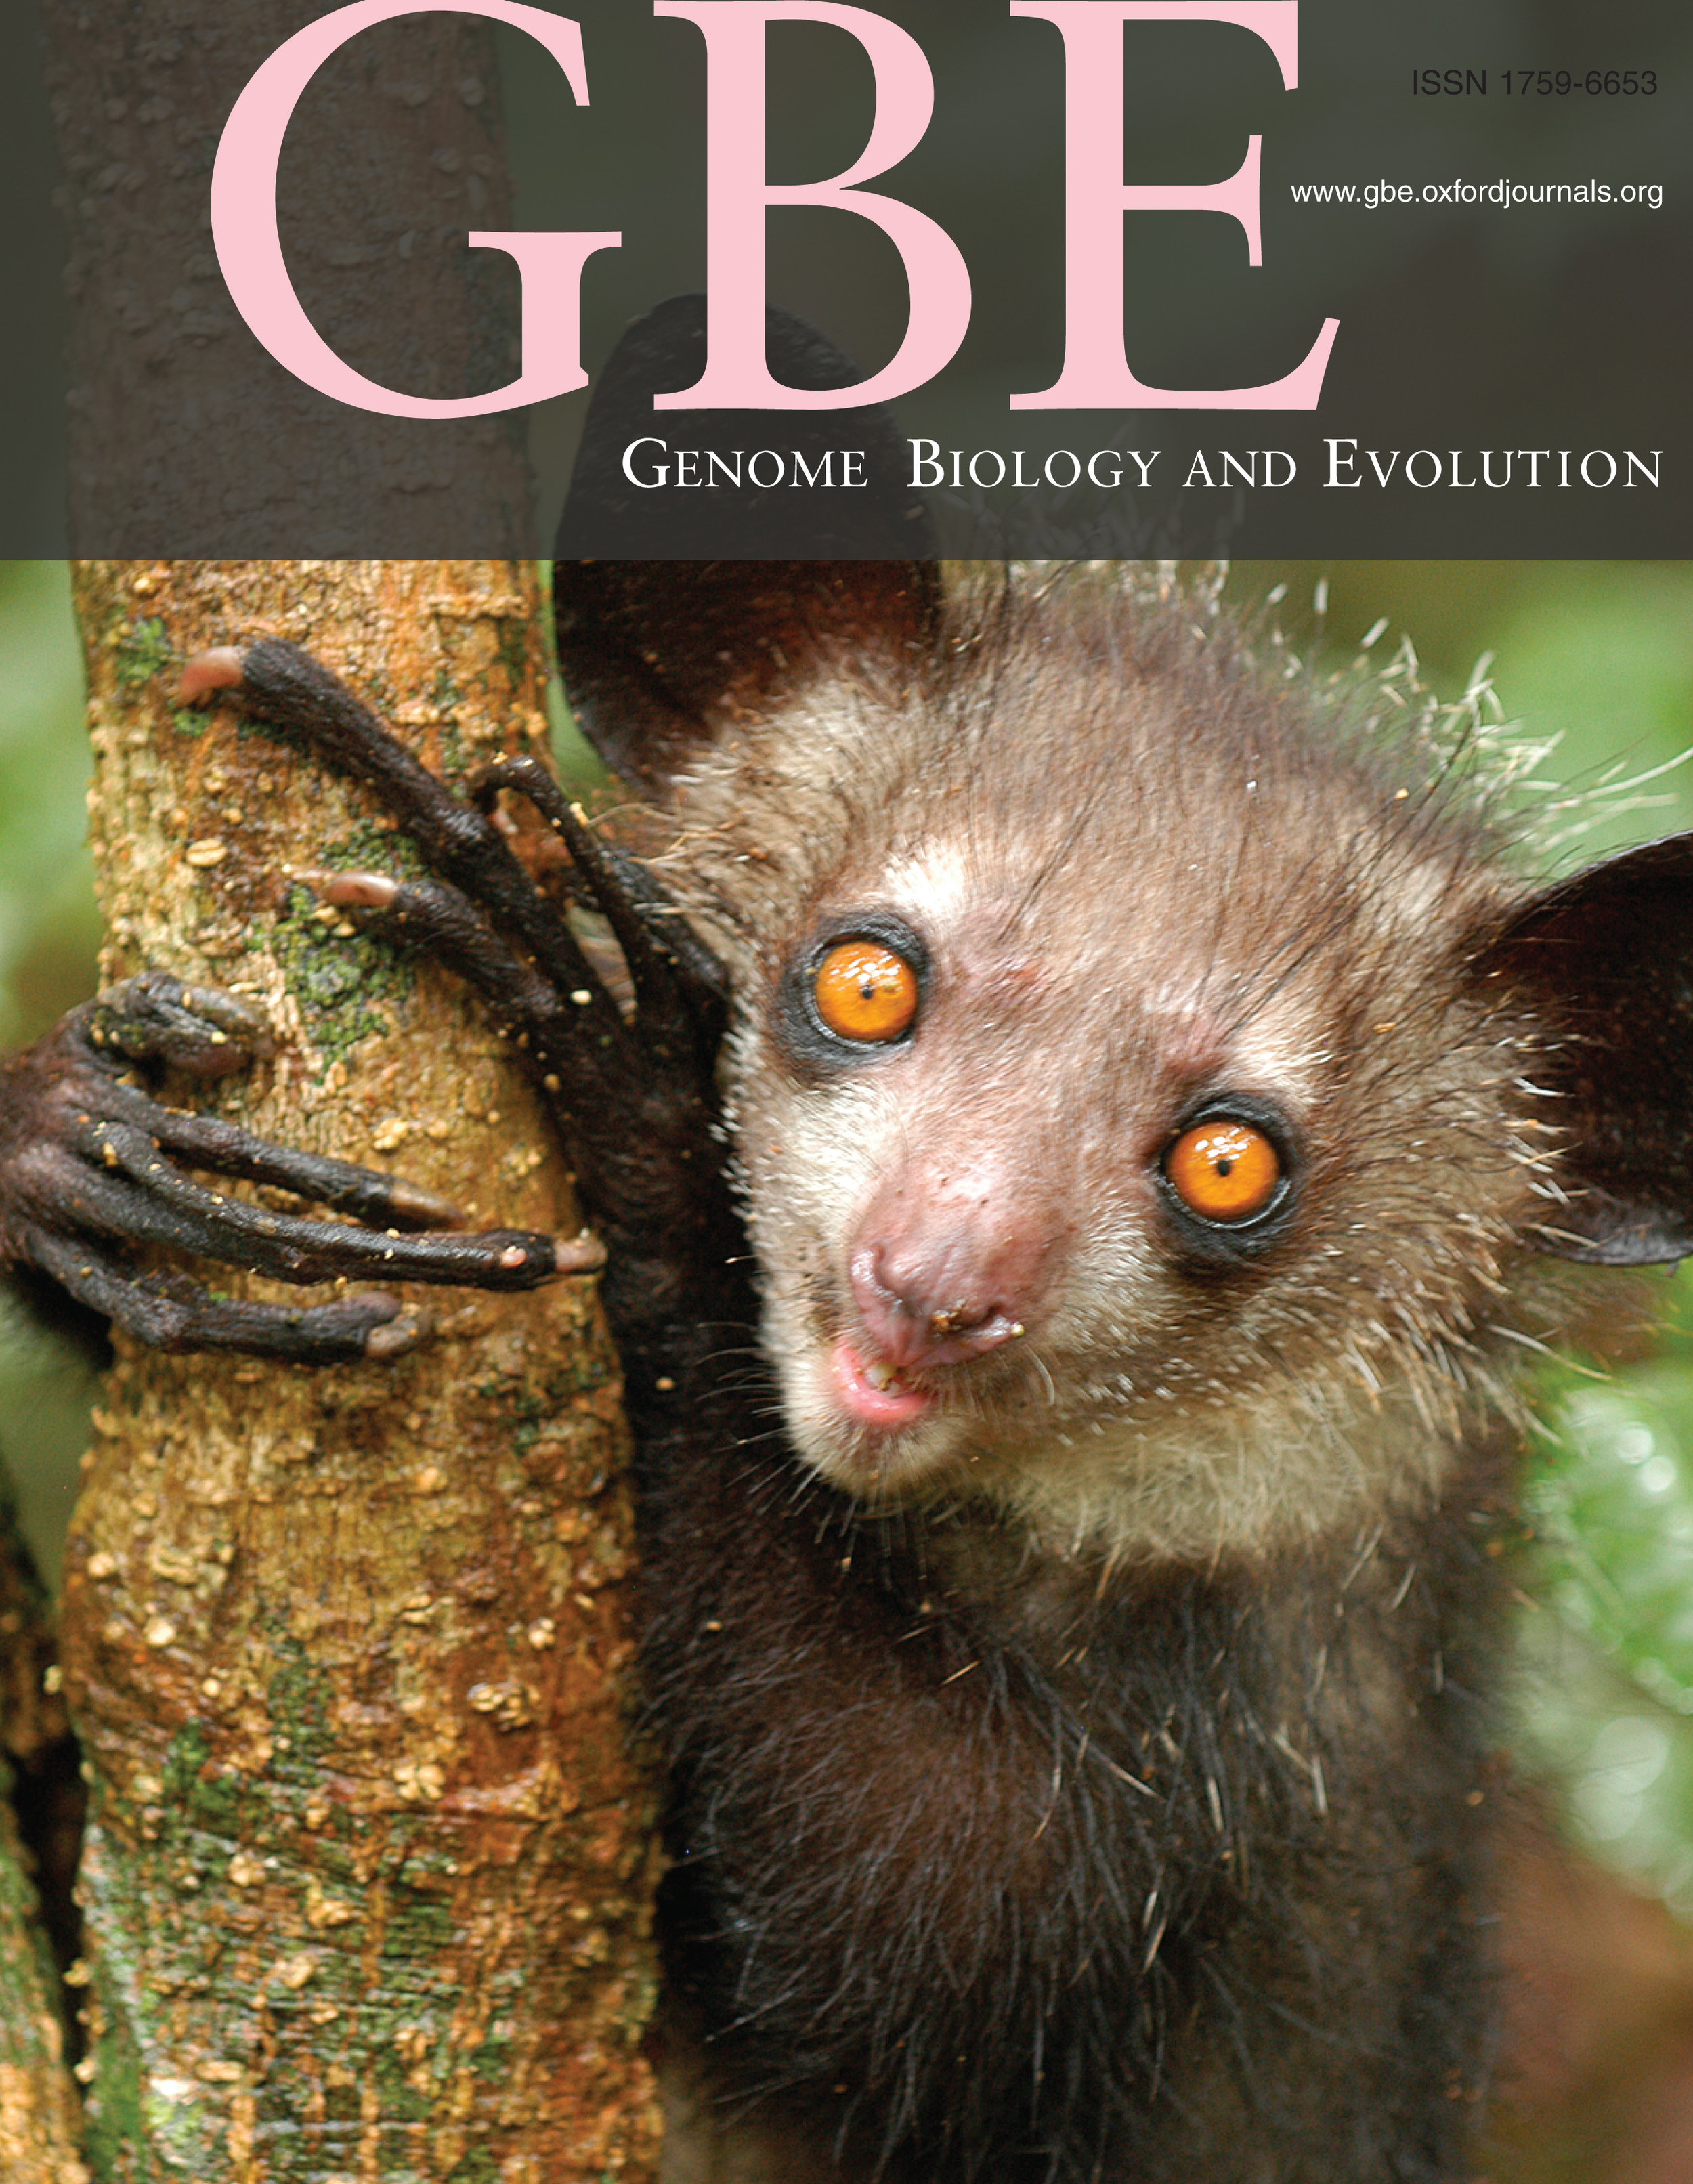   Genome Biology and Evolution  cover for  Perry et al. 2012 . Cover photo by Edward Louis. 